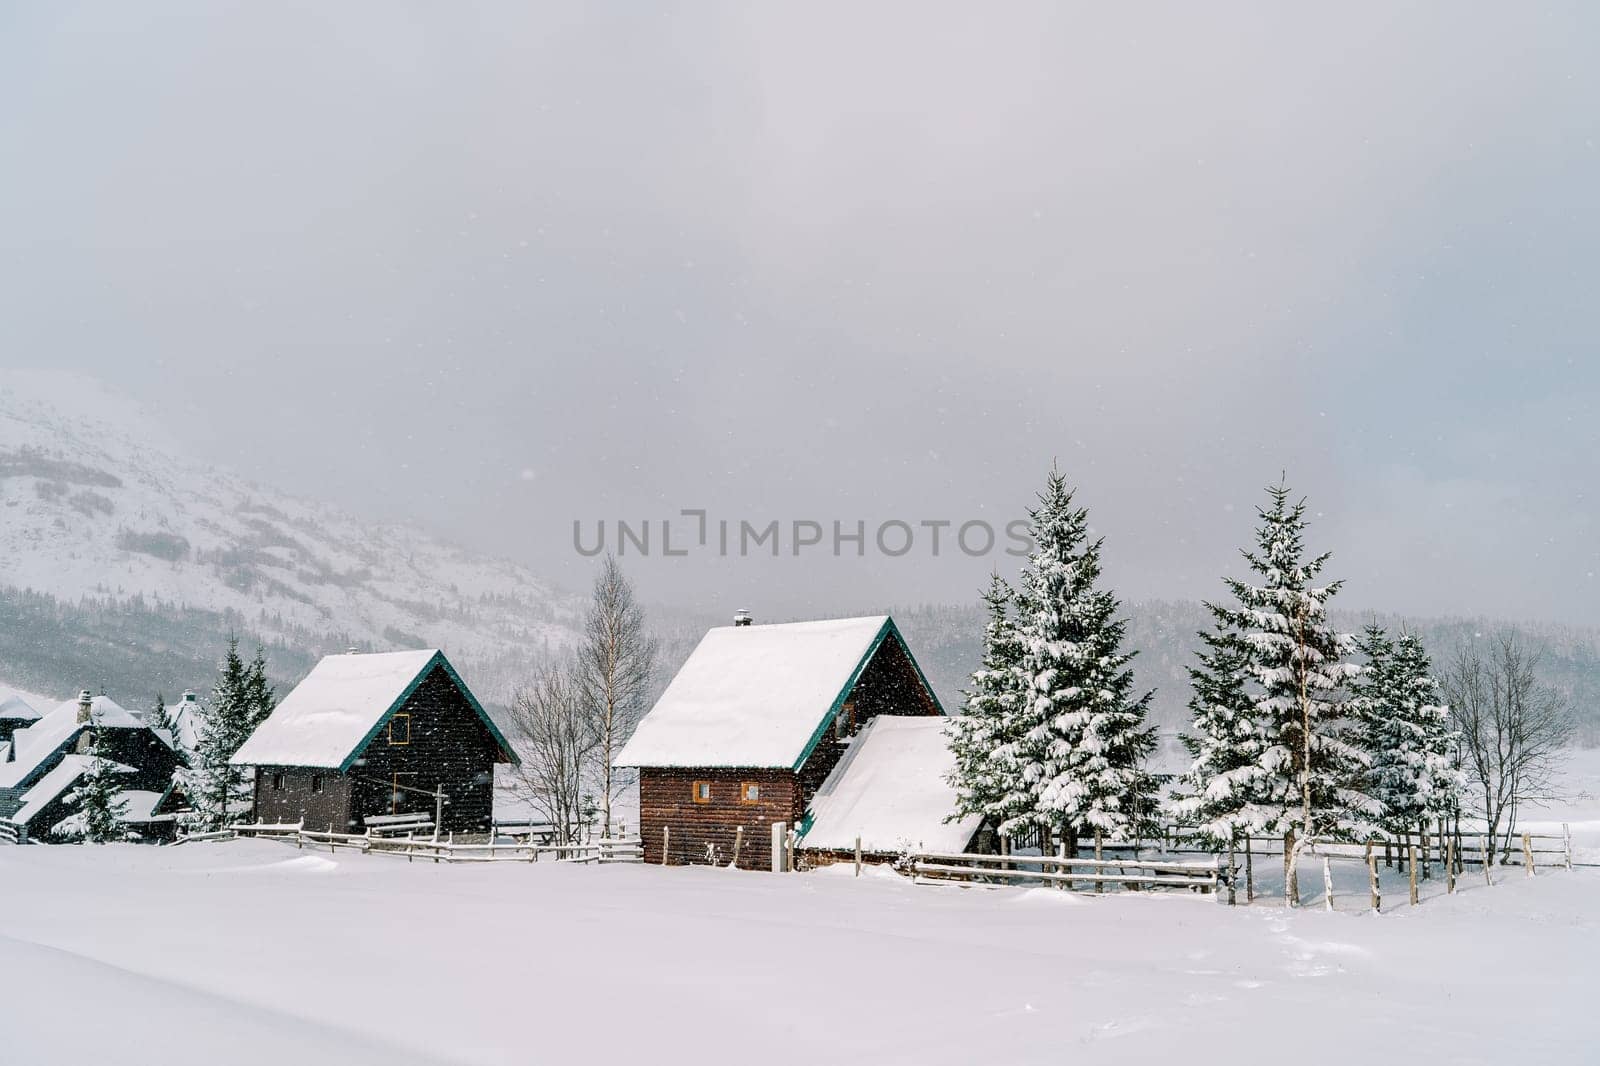 Snow-covered village surrounded by fir trees in a mountain valley under snowfall. High quality photo